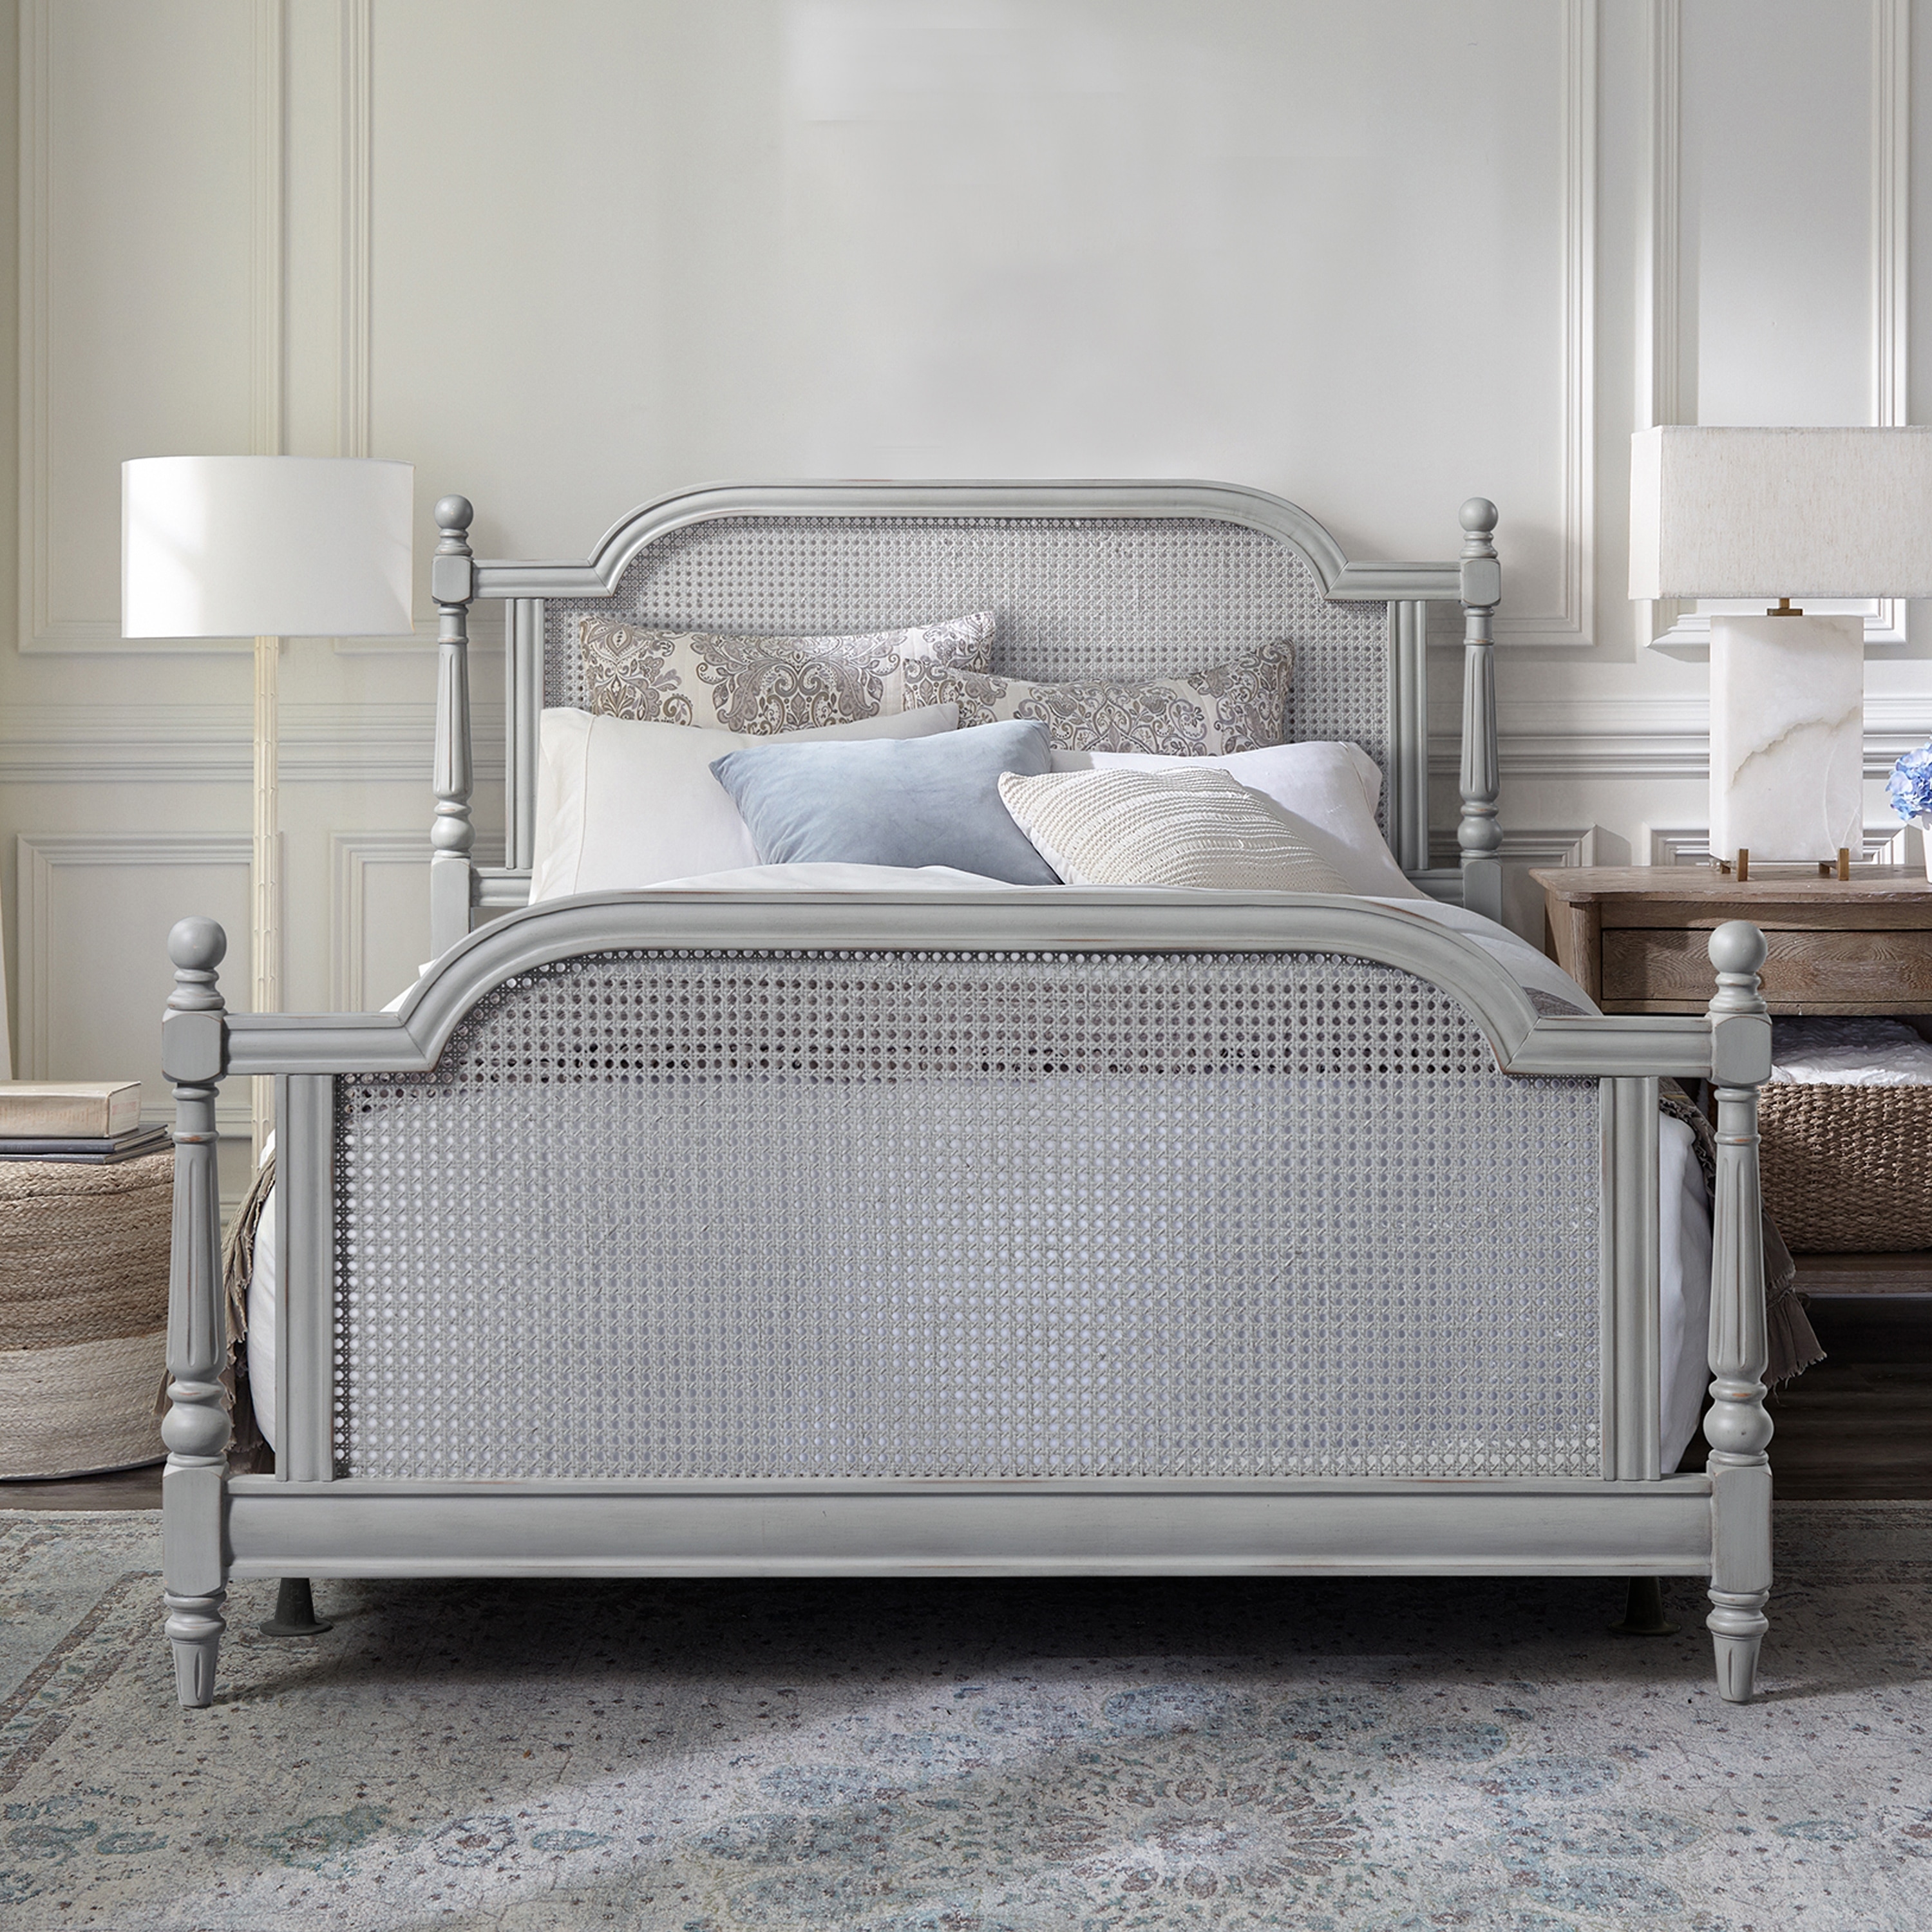 Camille Cane Bed, Low Footboard – THE BEAUTIFUL BED COMPANY